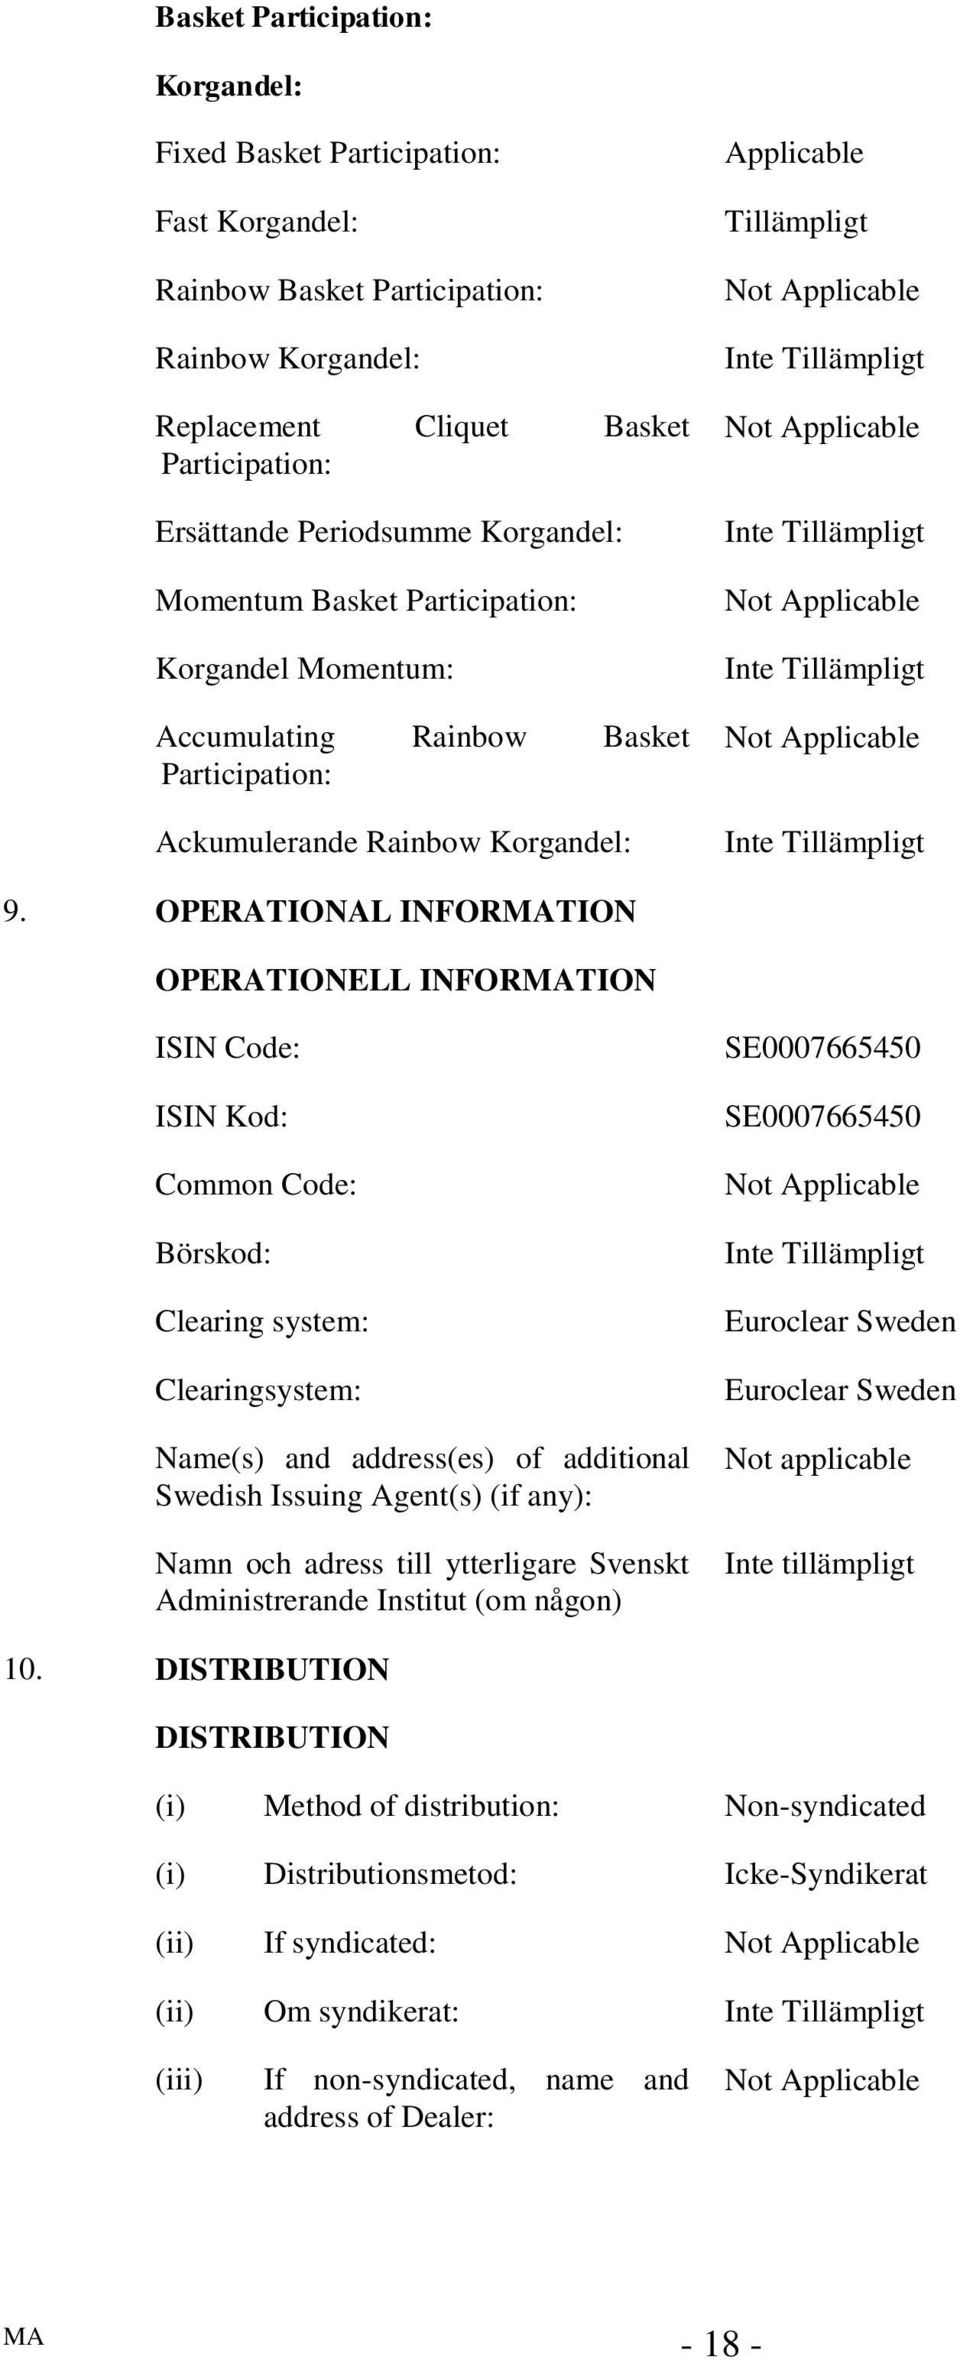 OPERATIONAL INFORTION OPERATIONELL INFORTION ISIN Code: ISIN Kod: Common Code: Börskod: Clearing system: Clearingsystem: Name(s) and address(es) of additional Swedish Issuing Agent(s) (if any): Namn